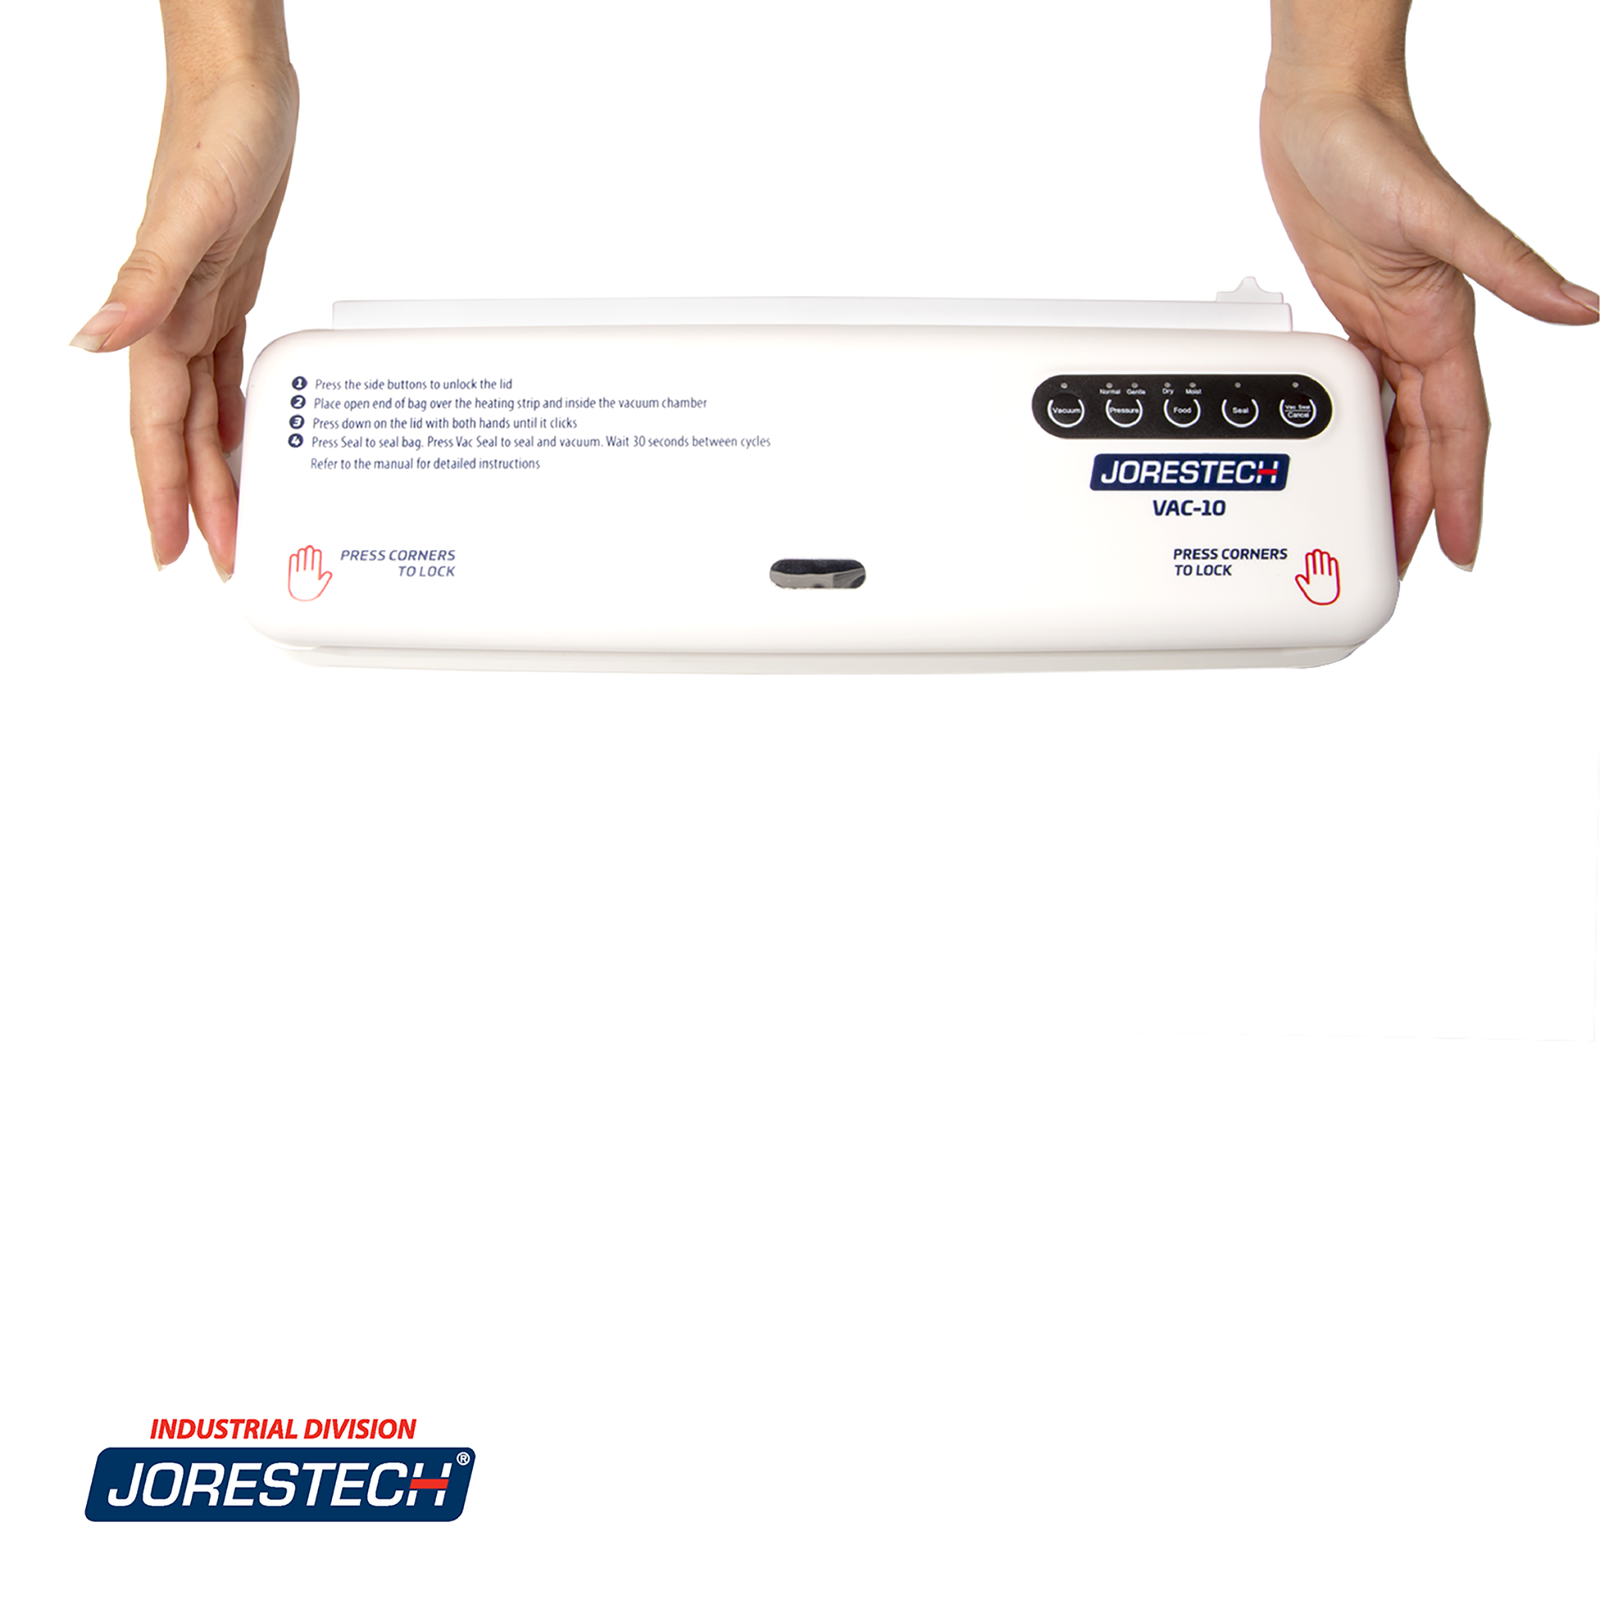 JORESTECH® white vacuum sealing machine with cutter over a white background. A person's hands are touching the two side-release buttons on the vacuum lid in order to open the lid. 